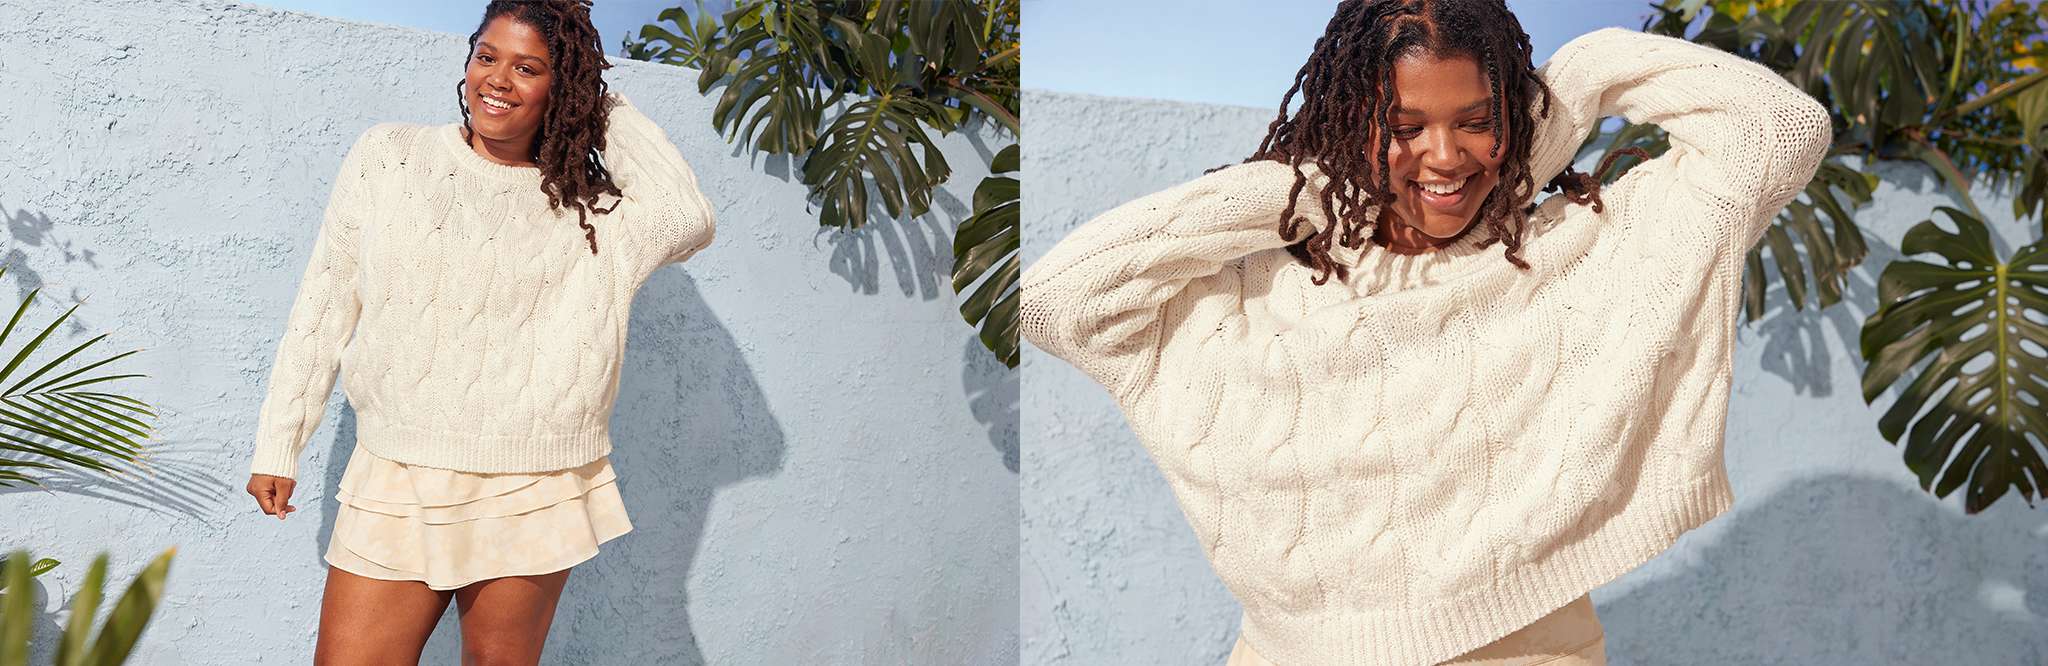 Aerie Sweaters Image